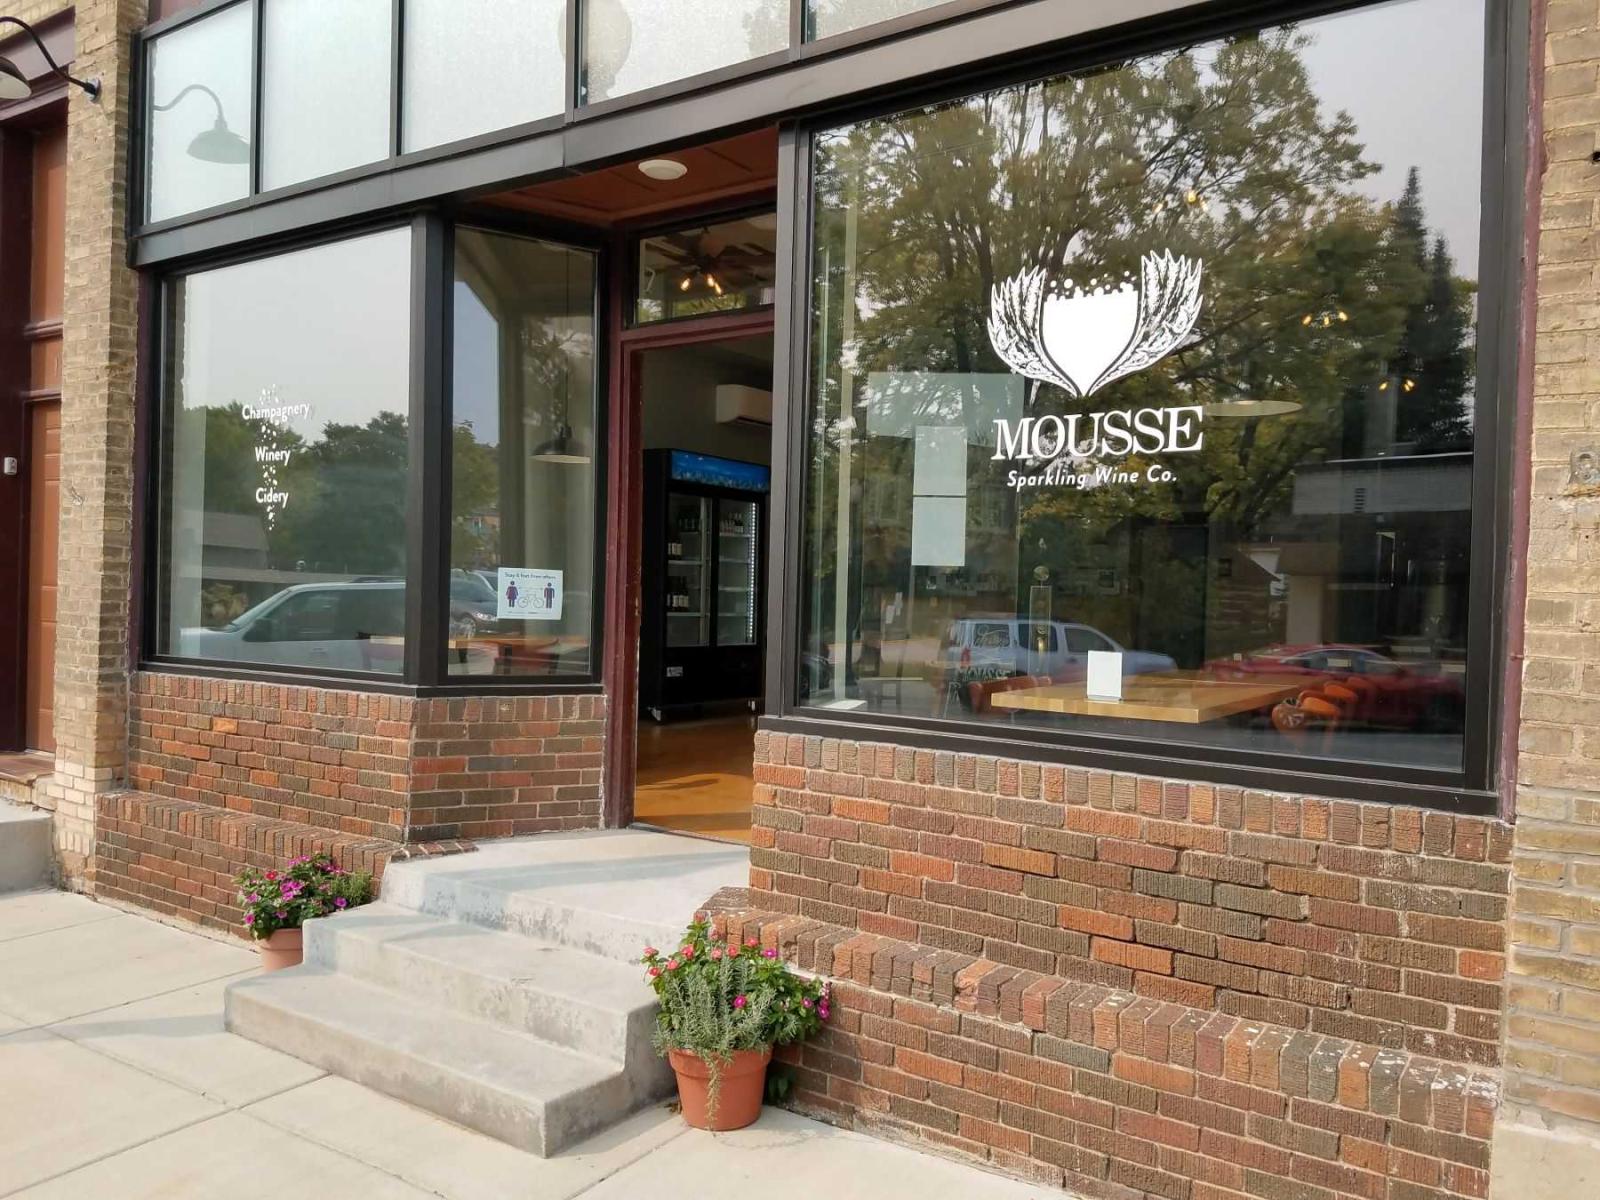 Mousse is located in downtown Jordan, Minnesota. 